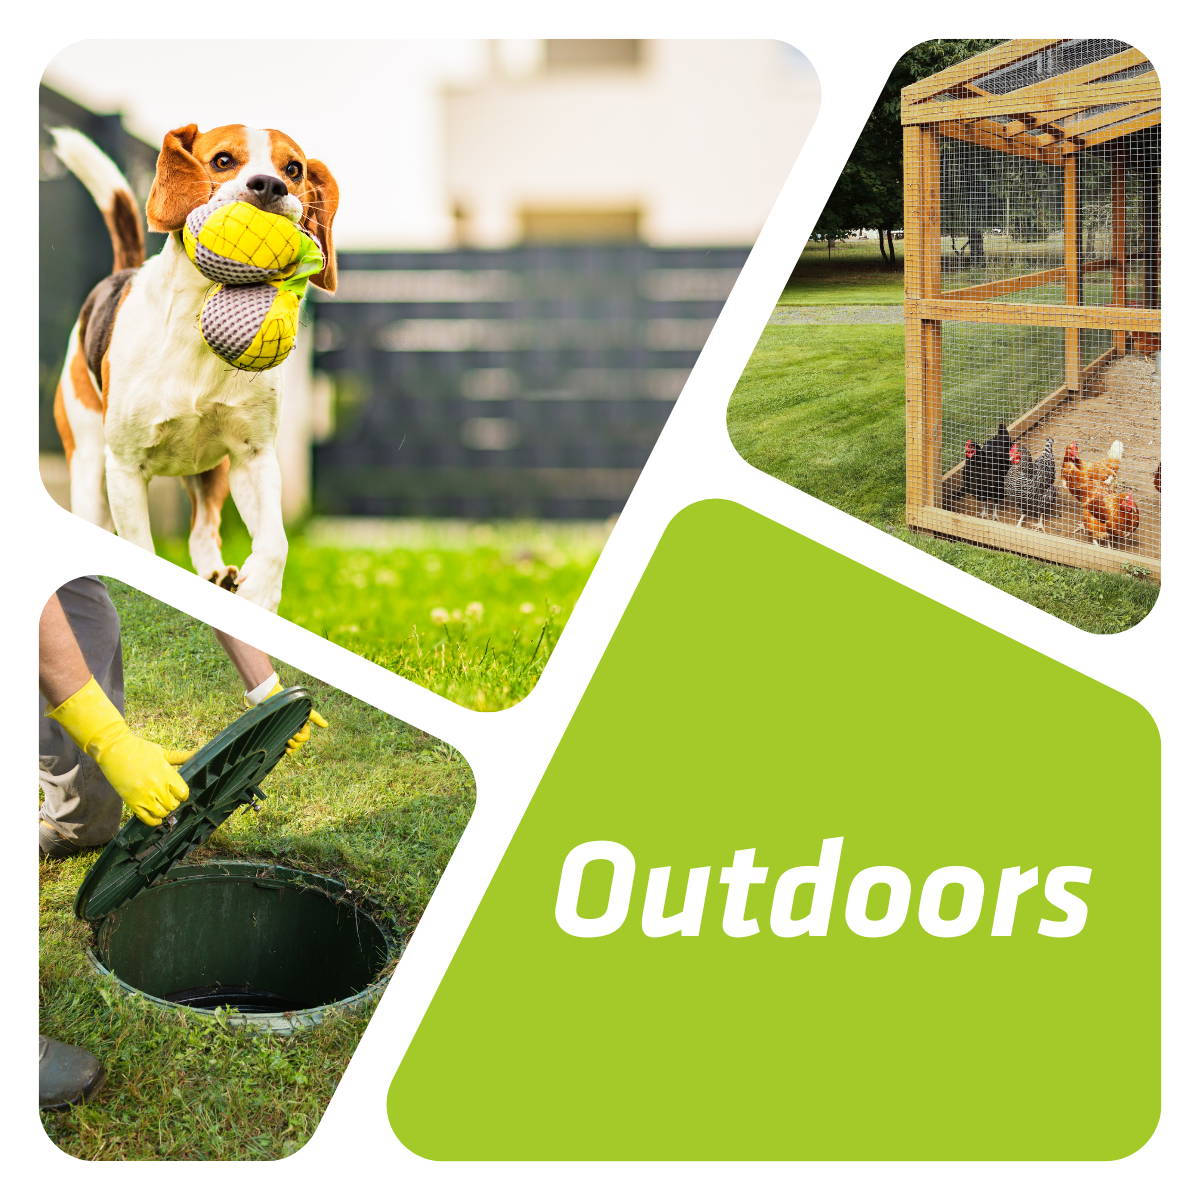 Outdoor waste and odor solutions